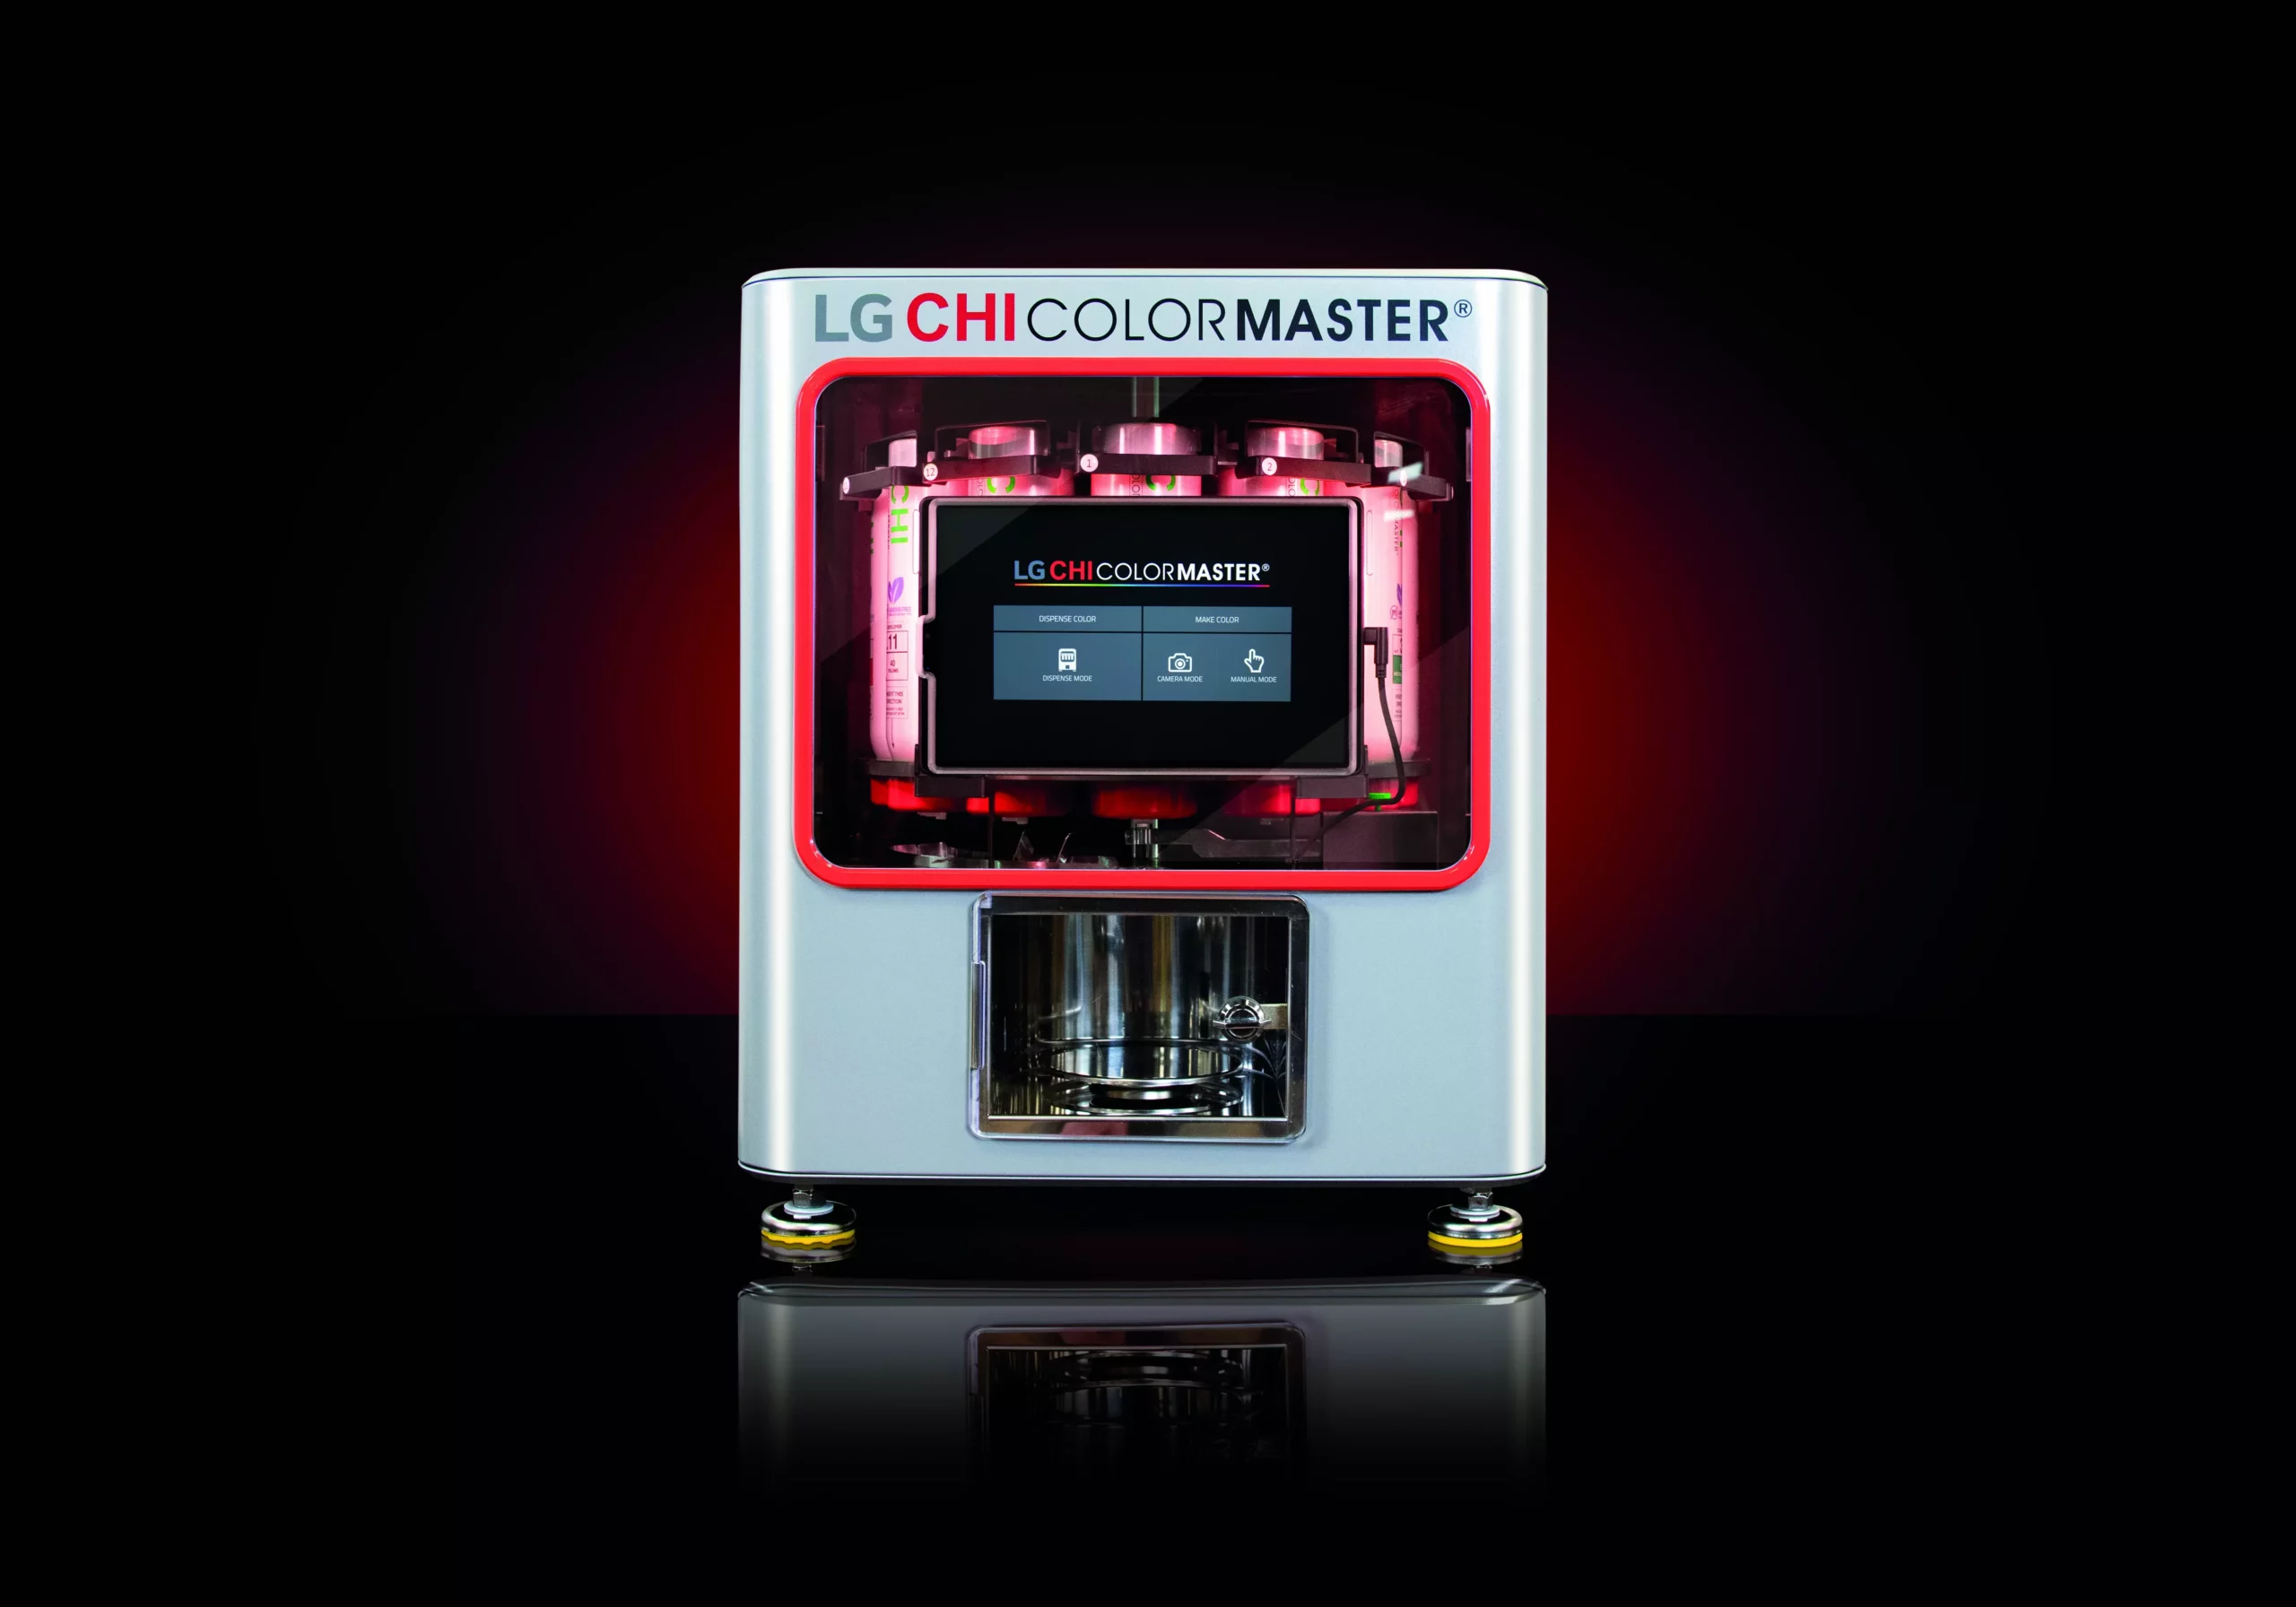 CHI Colormaster